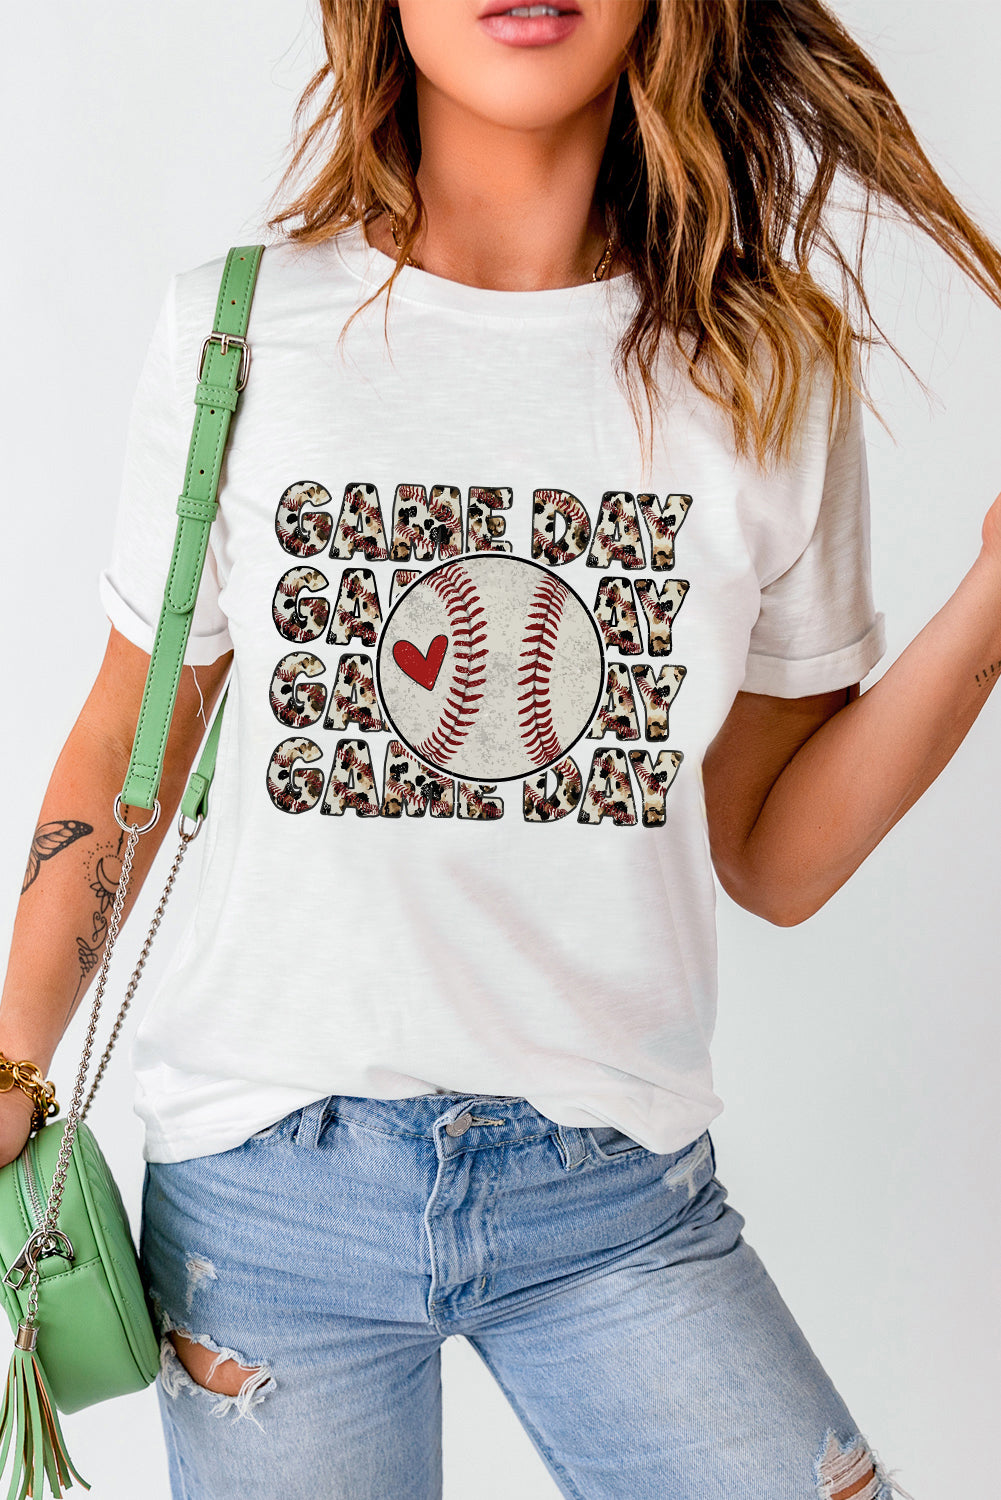 White Leopard GAME DAY Baseball Graphic T Shirt Graphic Tees JT's Designer Fashion